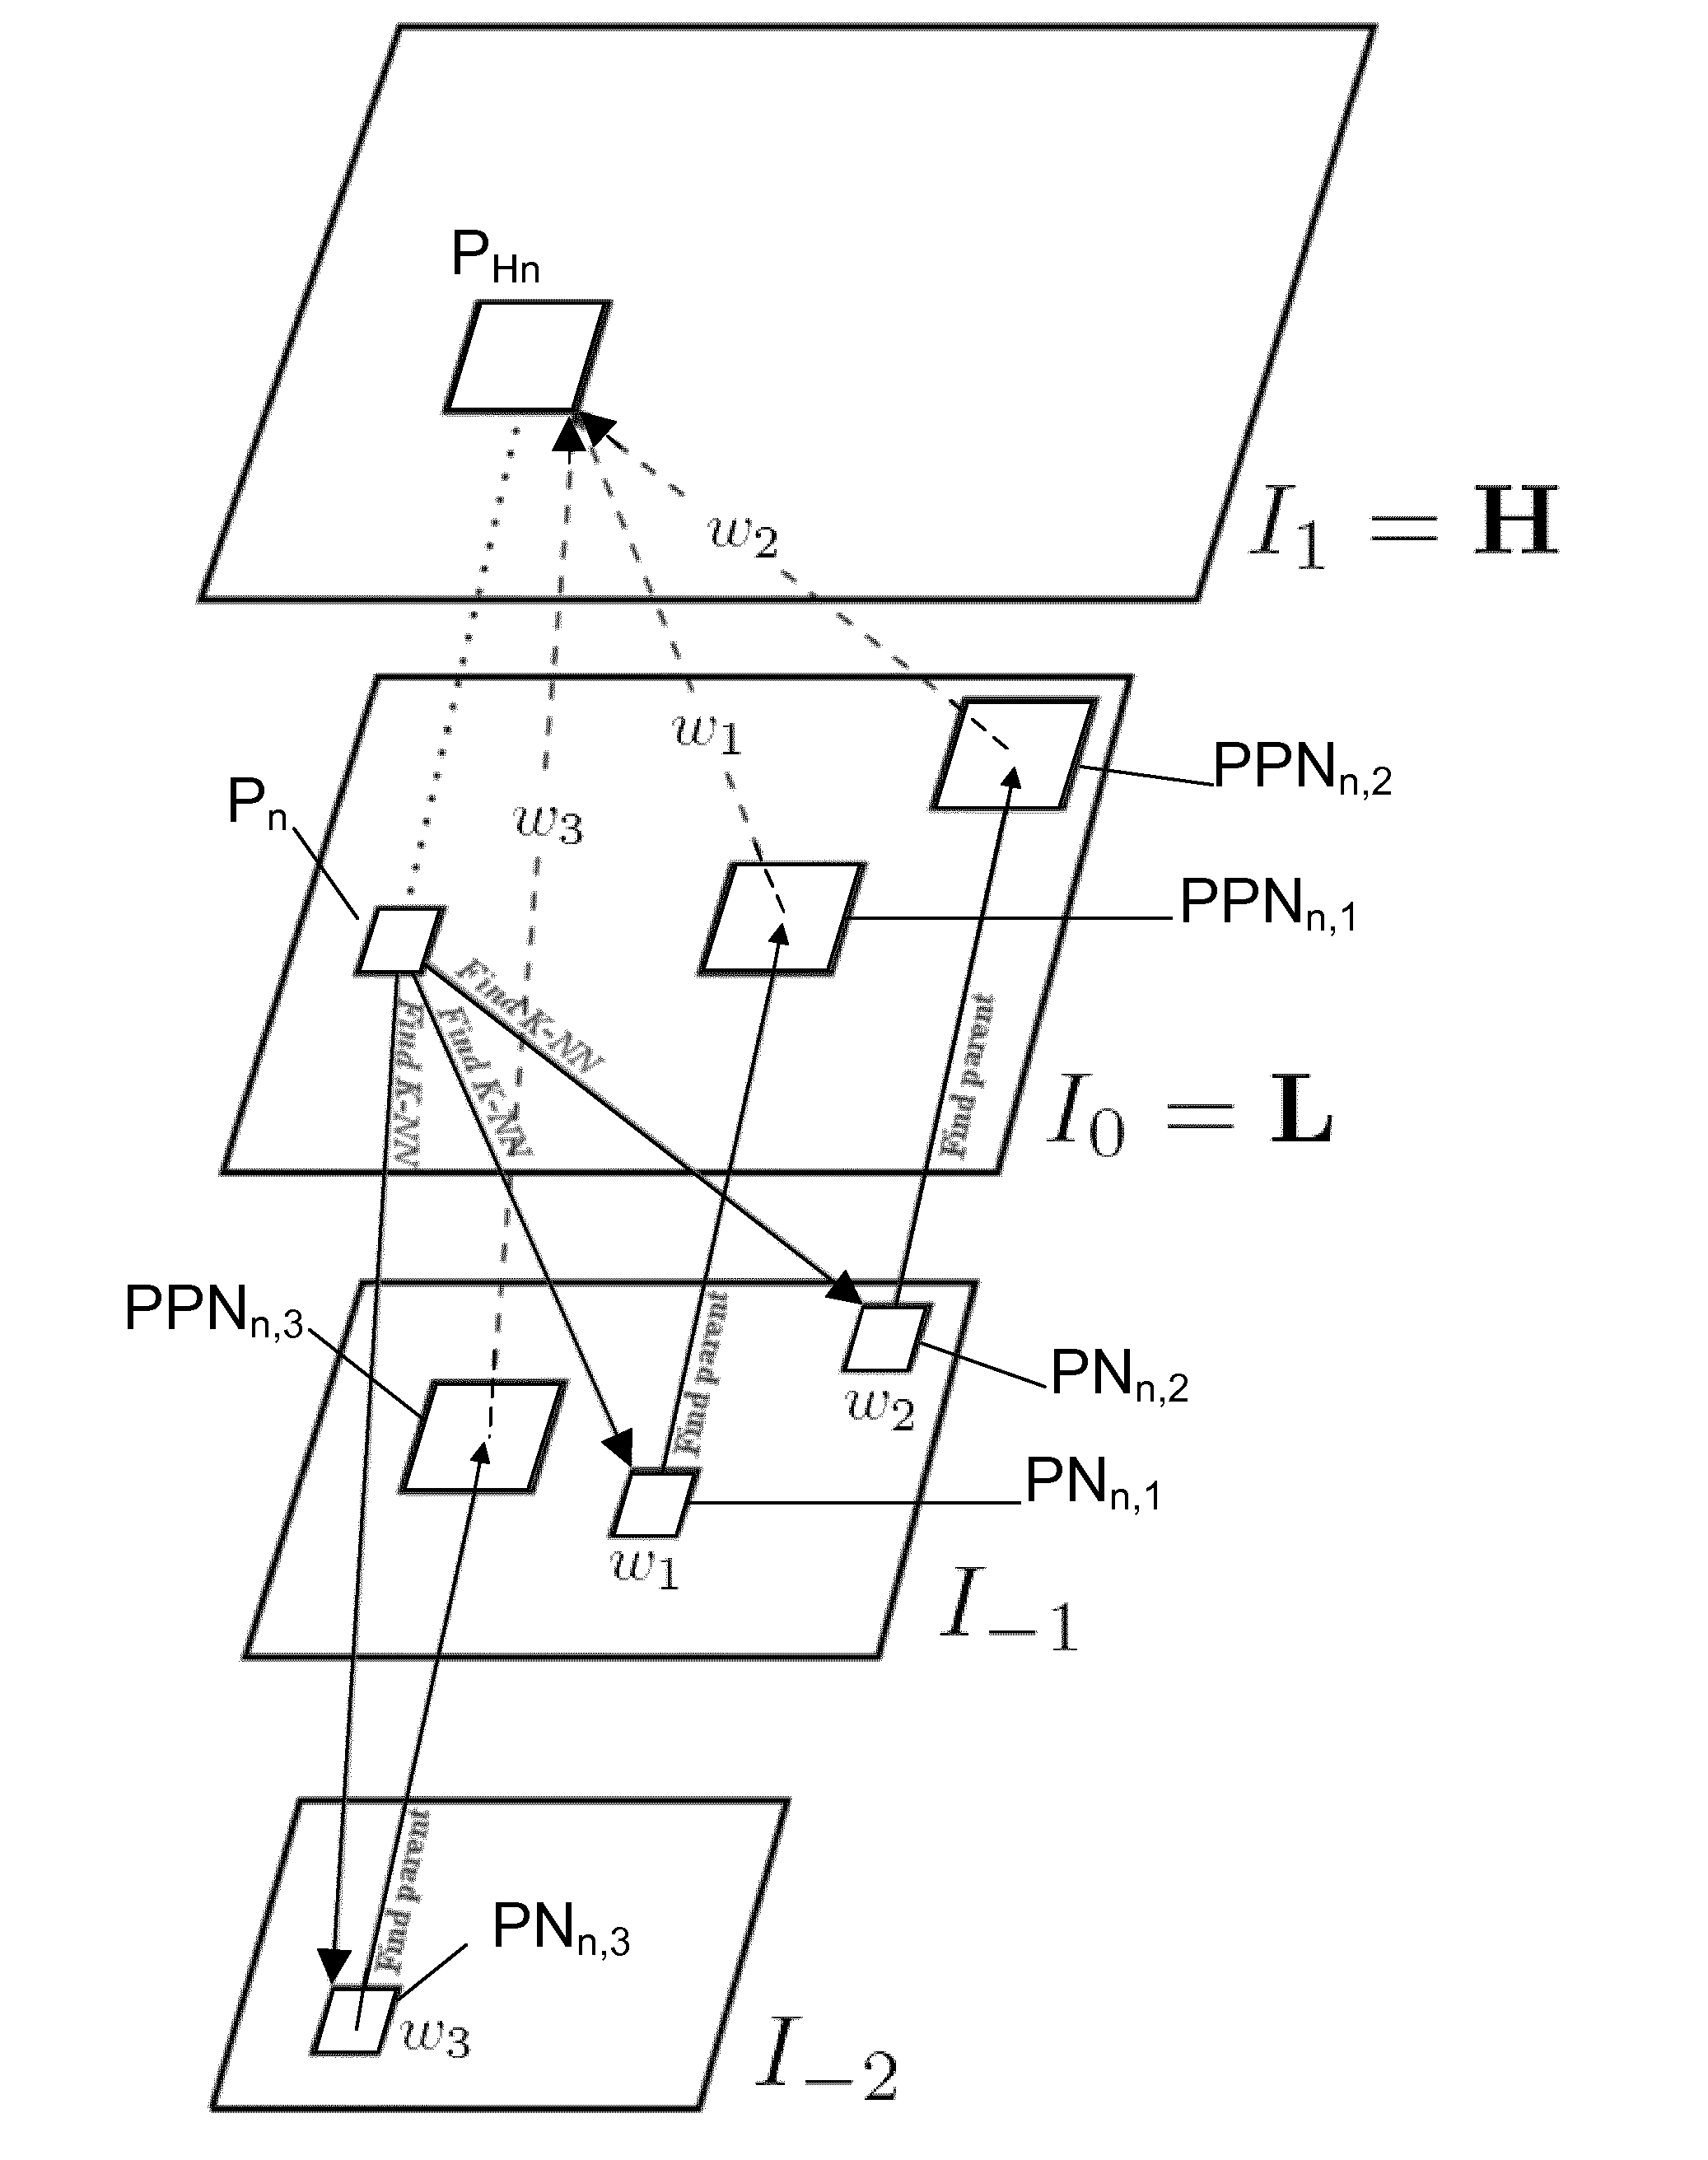 Method and apparatus for performing hierarchical super-resolution of an input image